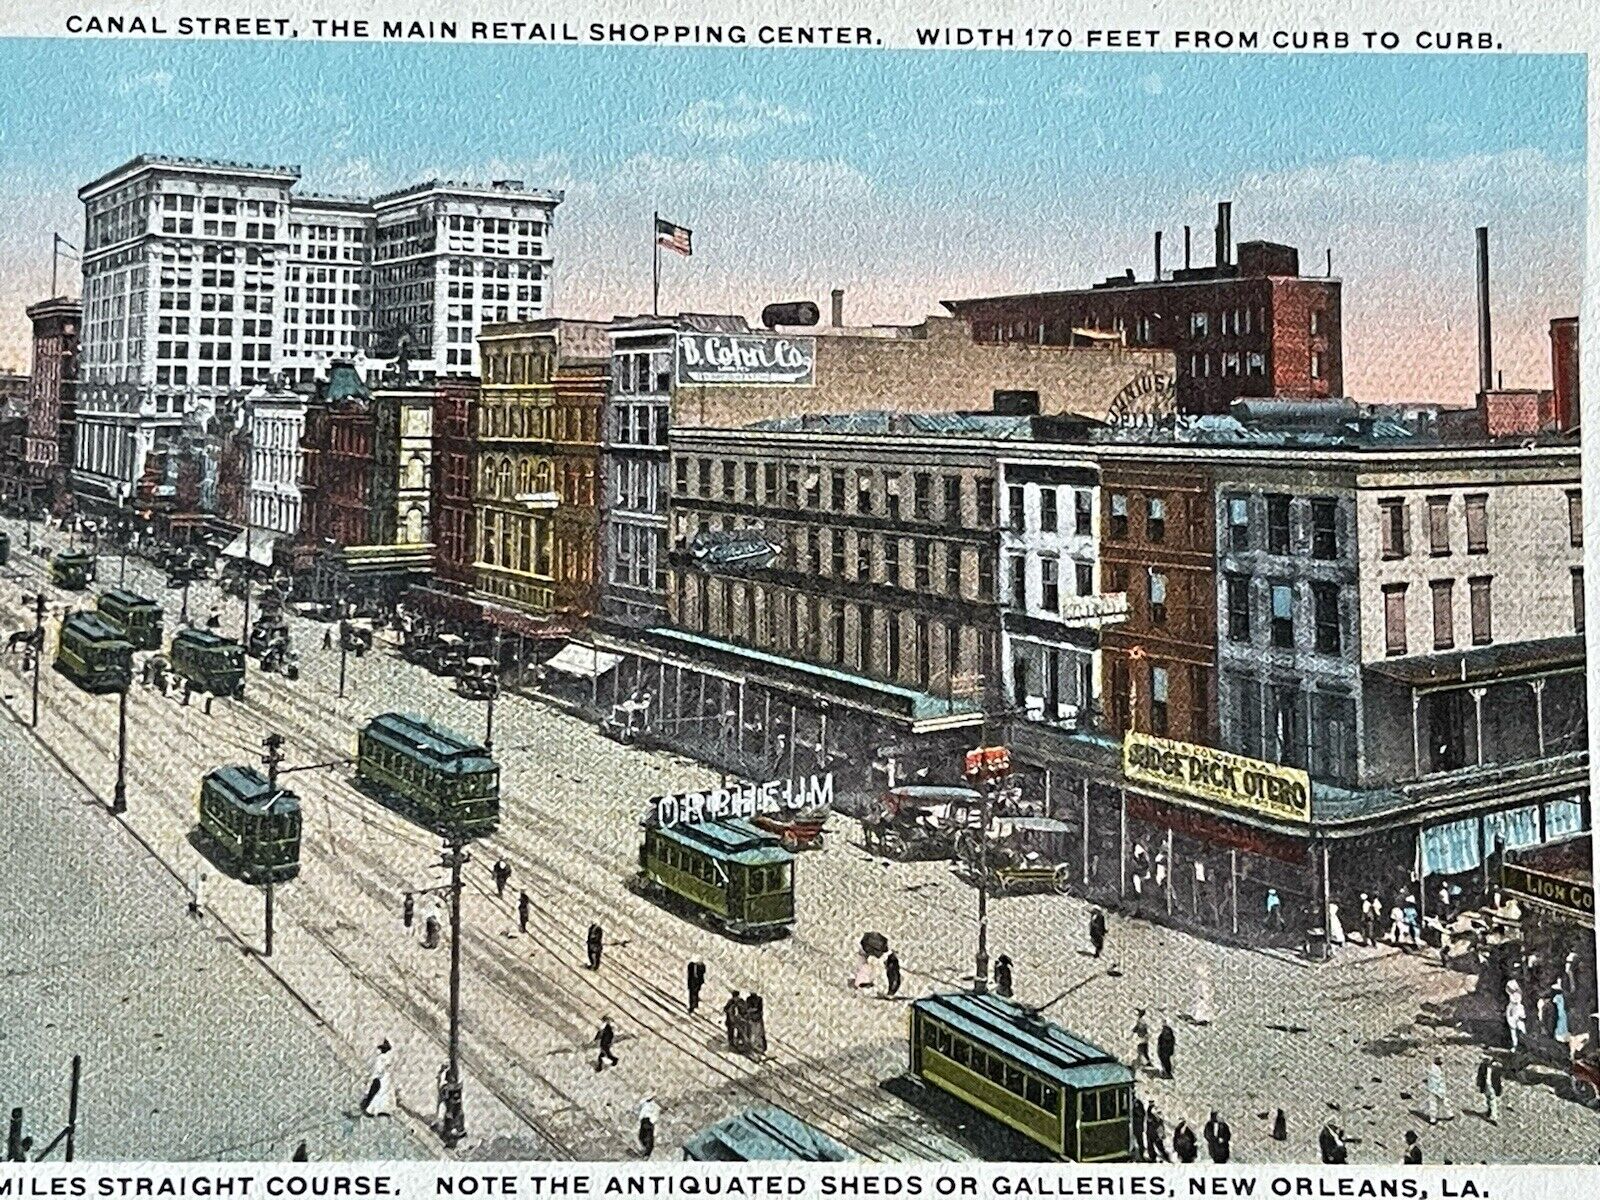 Busy Canal Street Trolley Cars & Shoppers 1910s New Orleans LA Postcard 